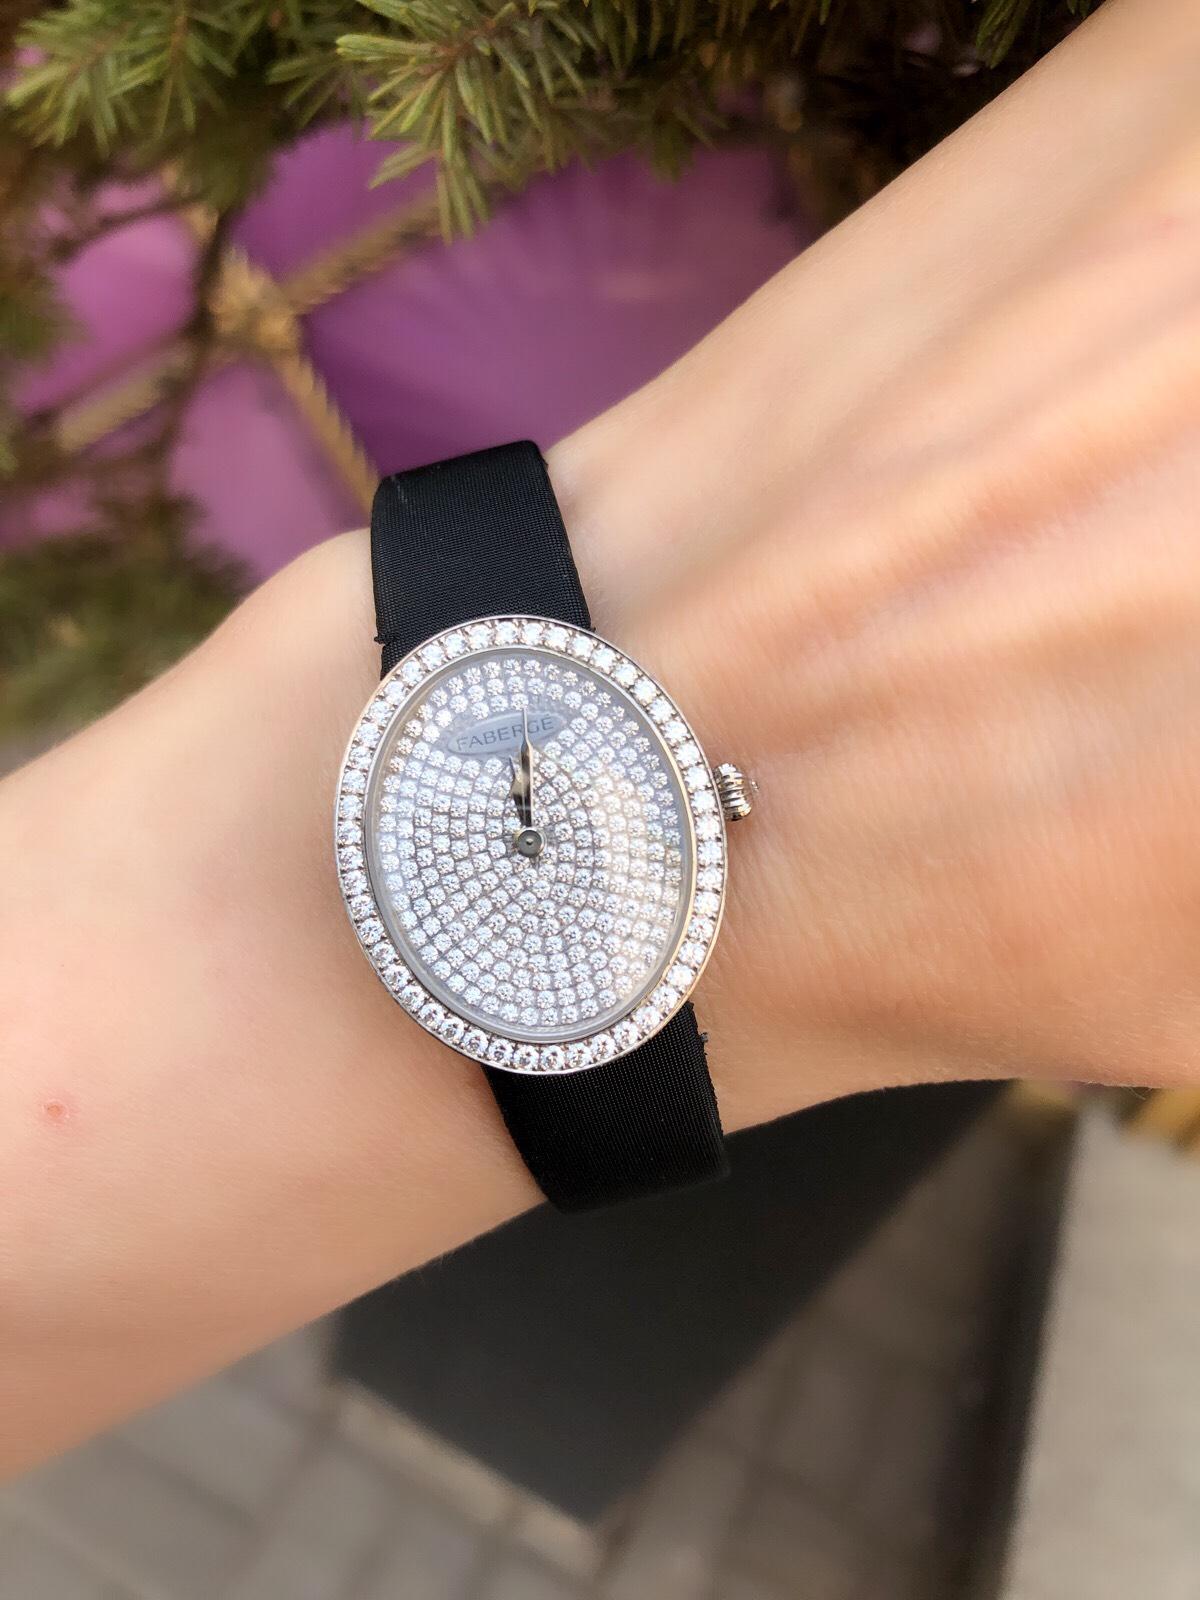 Anastasia Diamond Ladies' Timepieces
113WA217/1
Fabergé timepieces embody the characteristic perfectionism and
panache pioneered by Peter Carl Fabergé, who ingeniously
incorporated clocks, and occasionally watches, into his rich
repertoire of